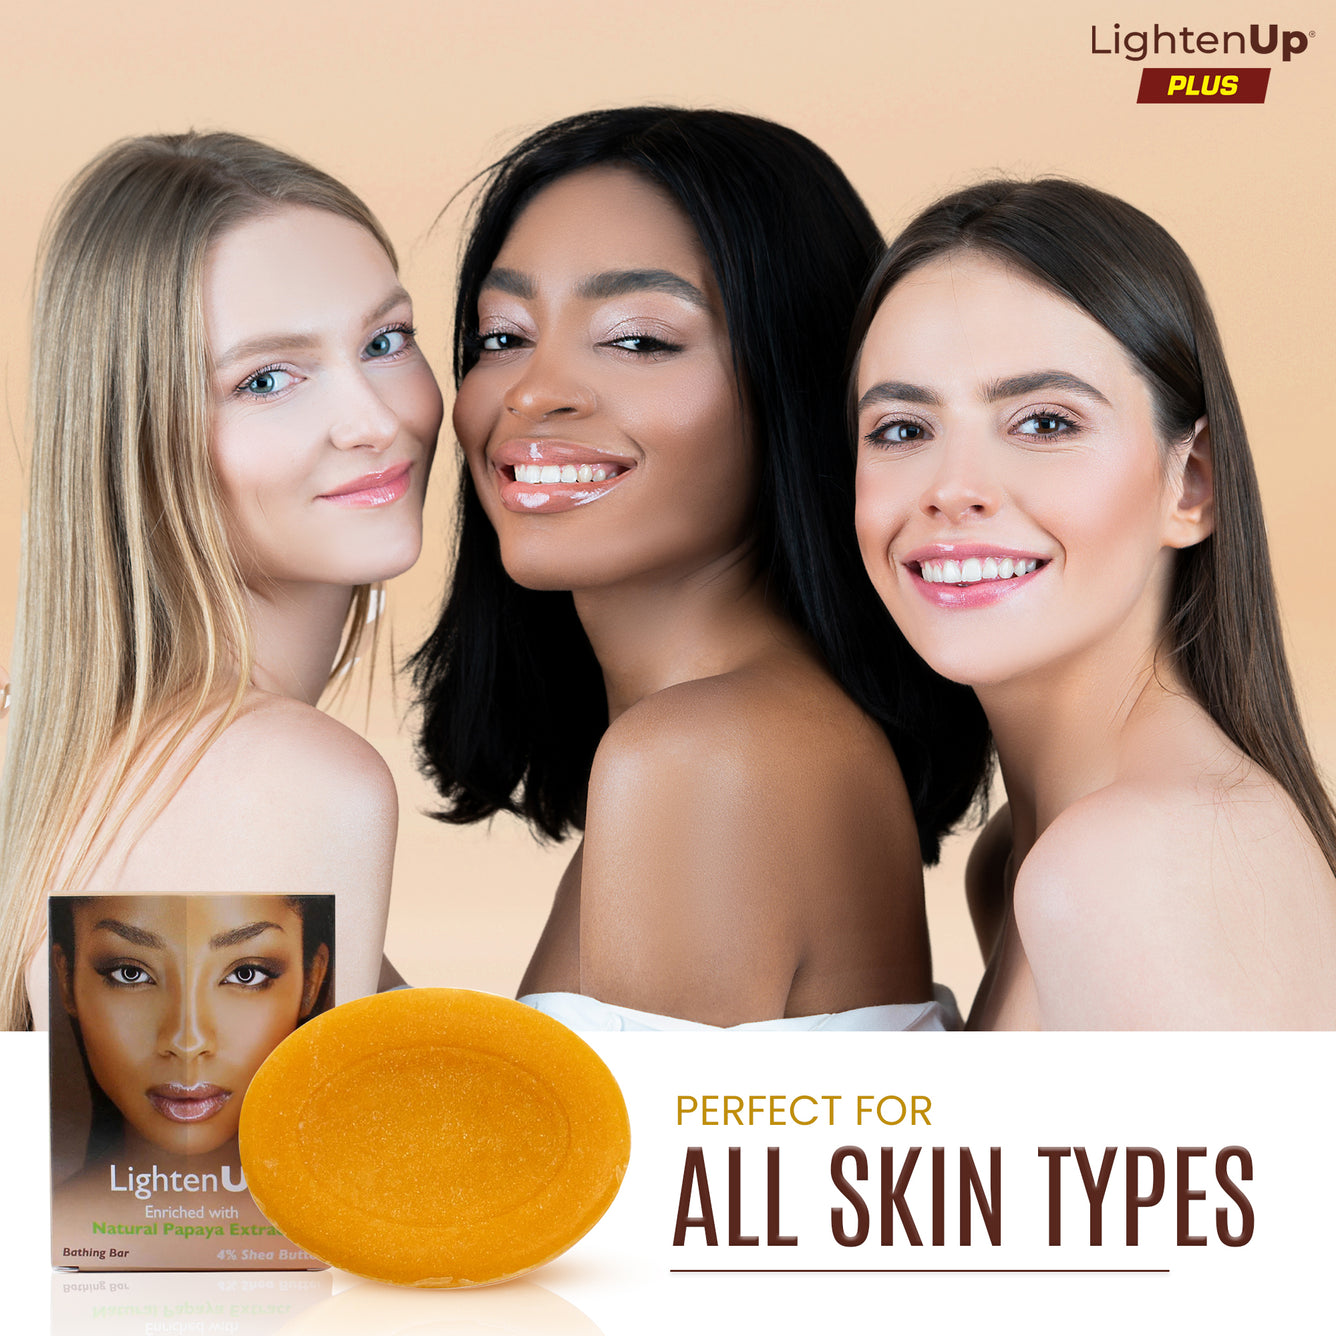 Omic LightenUp PLUS Natural Papaya Bathing Bar with Shea Butter LightenUp - Mitchell Brands - Skin Lightening, Skin Brightening, Fade Dark Spots, Shea Butter, Hair Growth Products